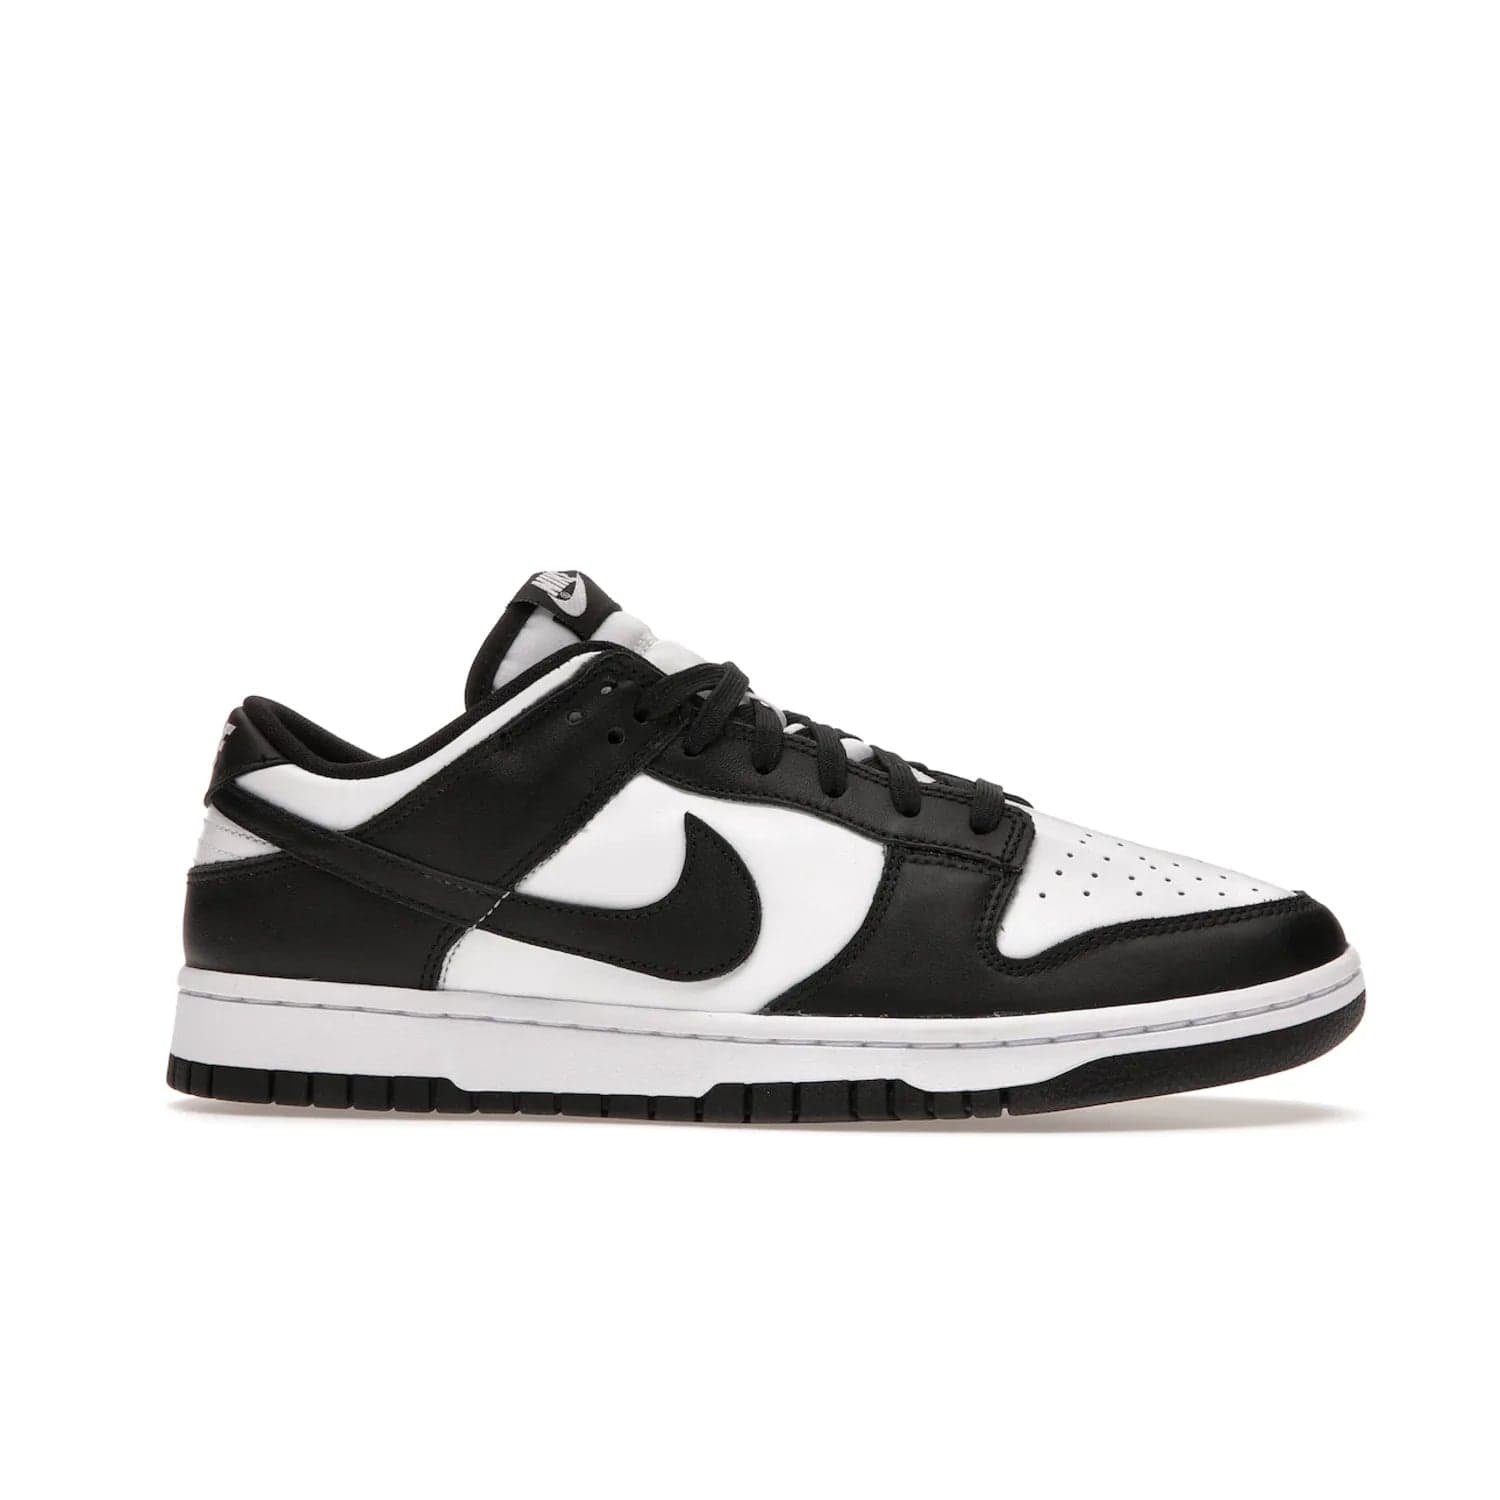 Nike Dunk Low Retro White Black Panda (2021) - Image 2 - Only at www.BallersClubKickz.com - Shop the Nike Dunk Low Retro White Black for classic styling featuring white leather with black leather overlays and classic Nike branding. Released in 2021, this timeless design offers a white midsole and black outsole for a stylish look. Shop all the Nike Dunks & rock this classic look.